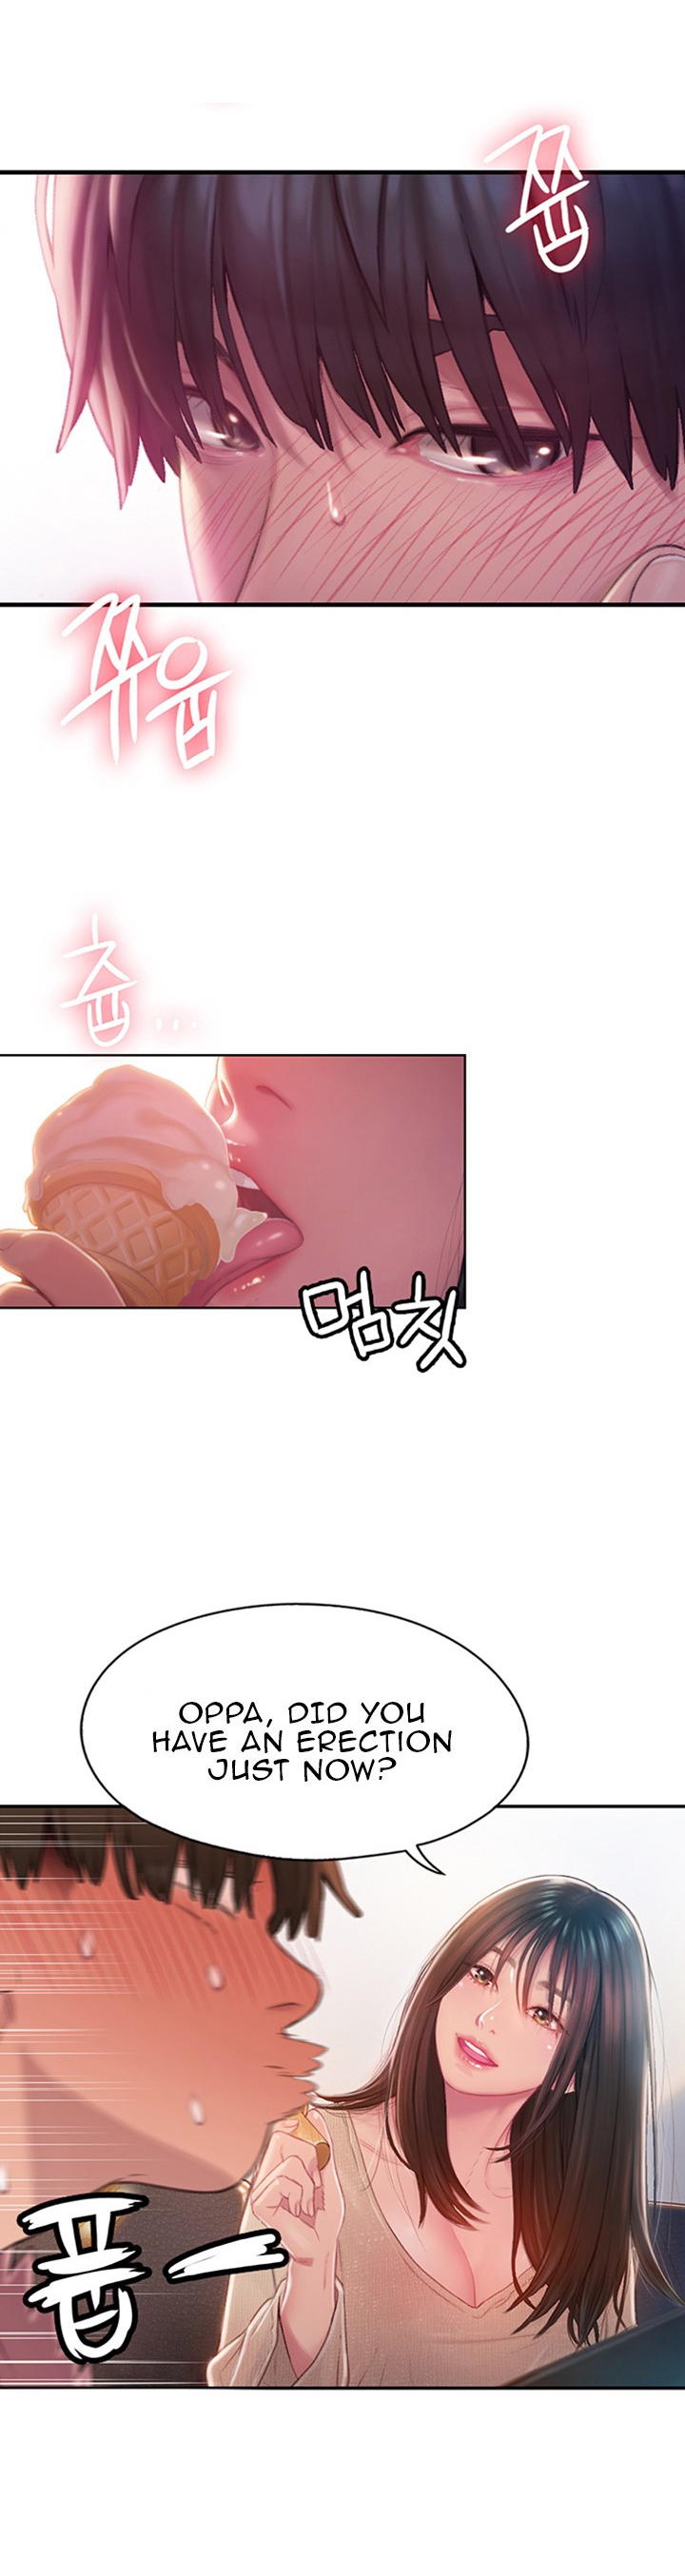 [Park Hyeongjun] Love Limit Exceeded (01-23) Ongoing - Page 4